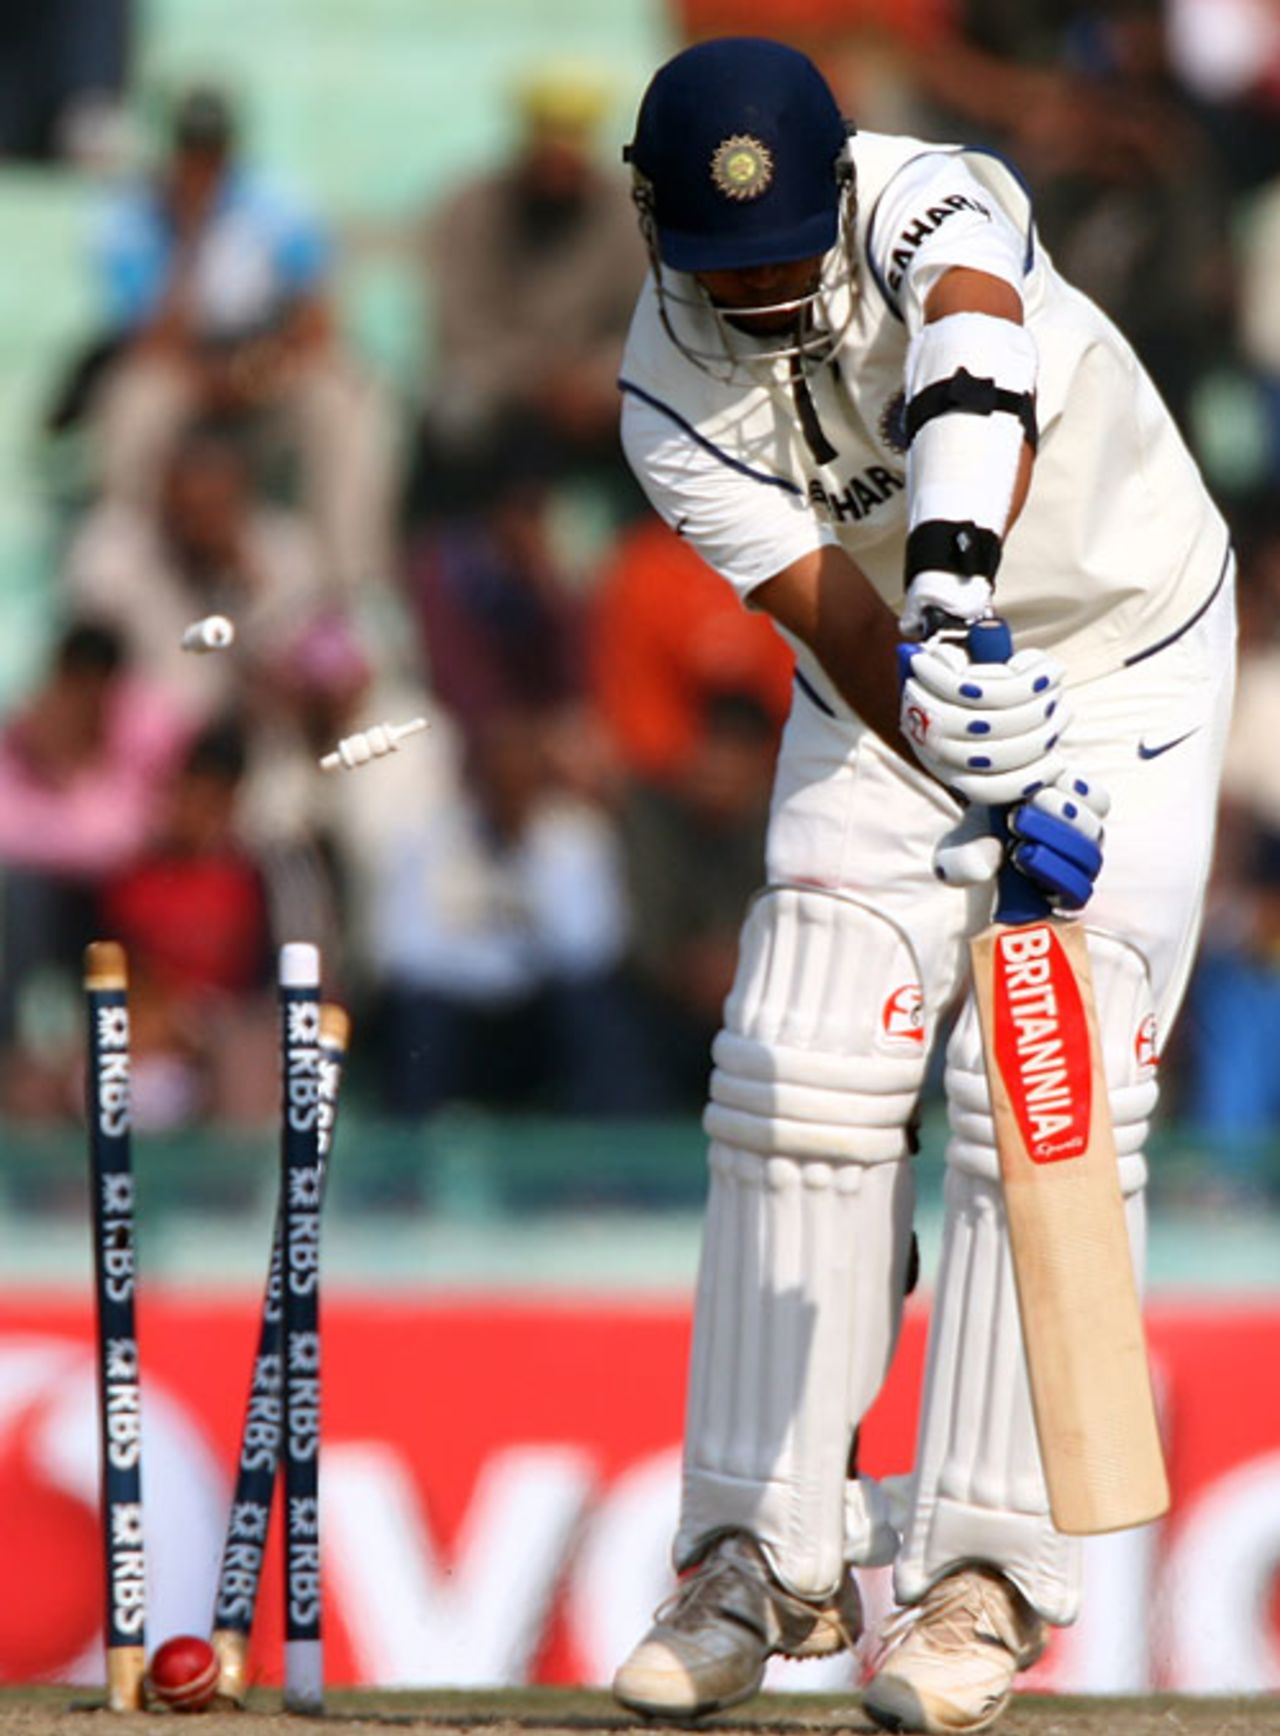 Rahul Dravid loses his middle stump to Stuart Broad, India v England, 2nd Test, Mohali, 4th day, December 22, 2008